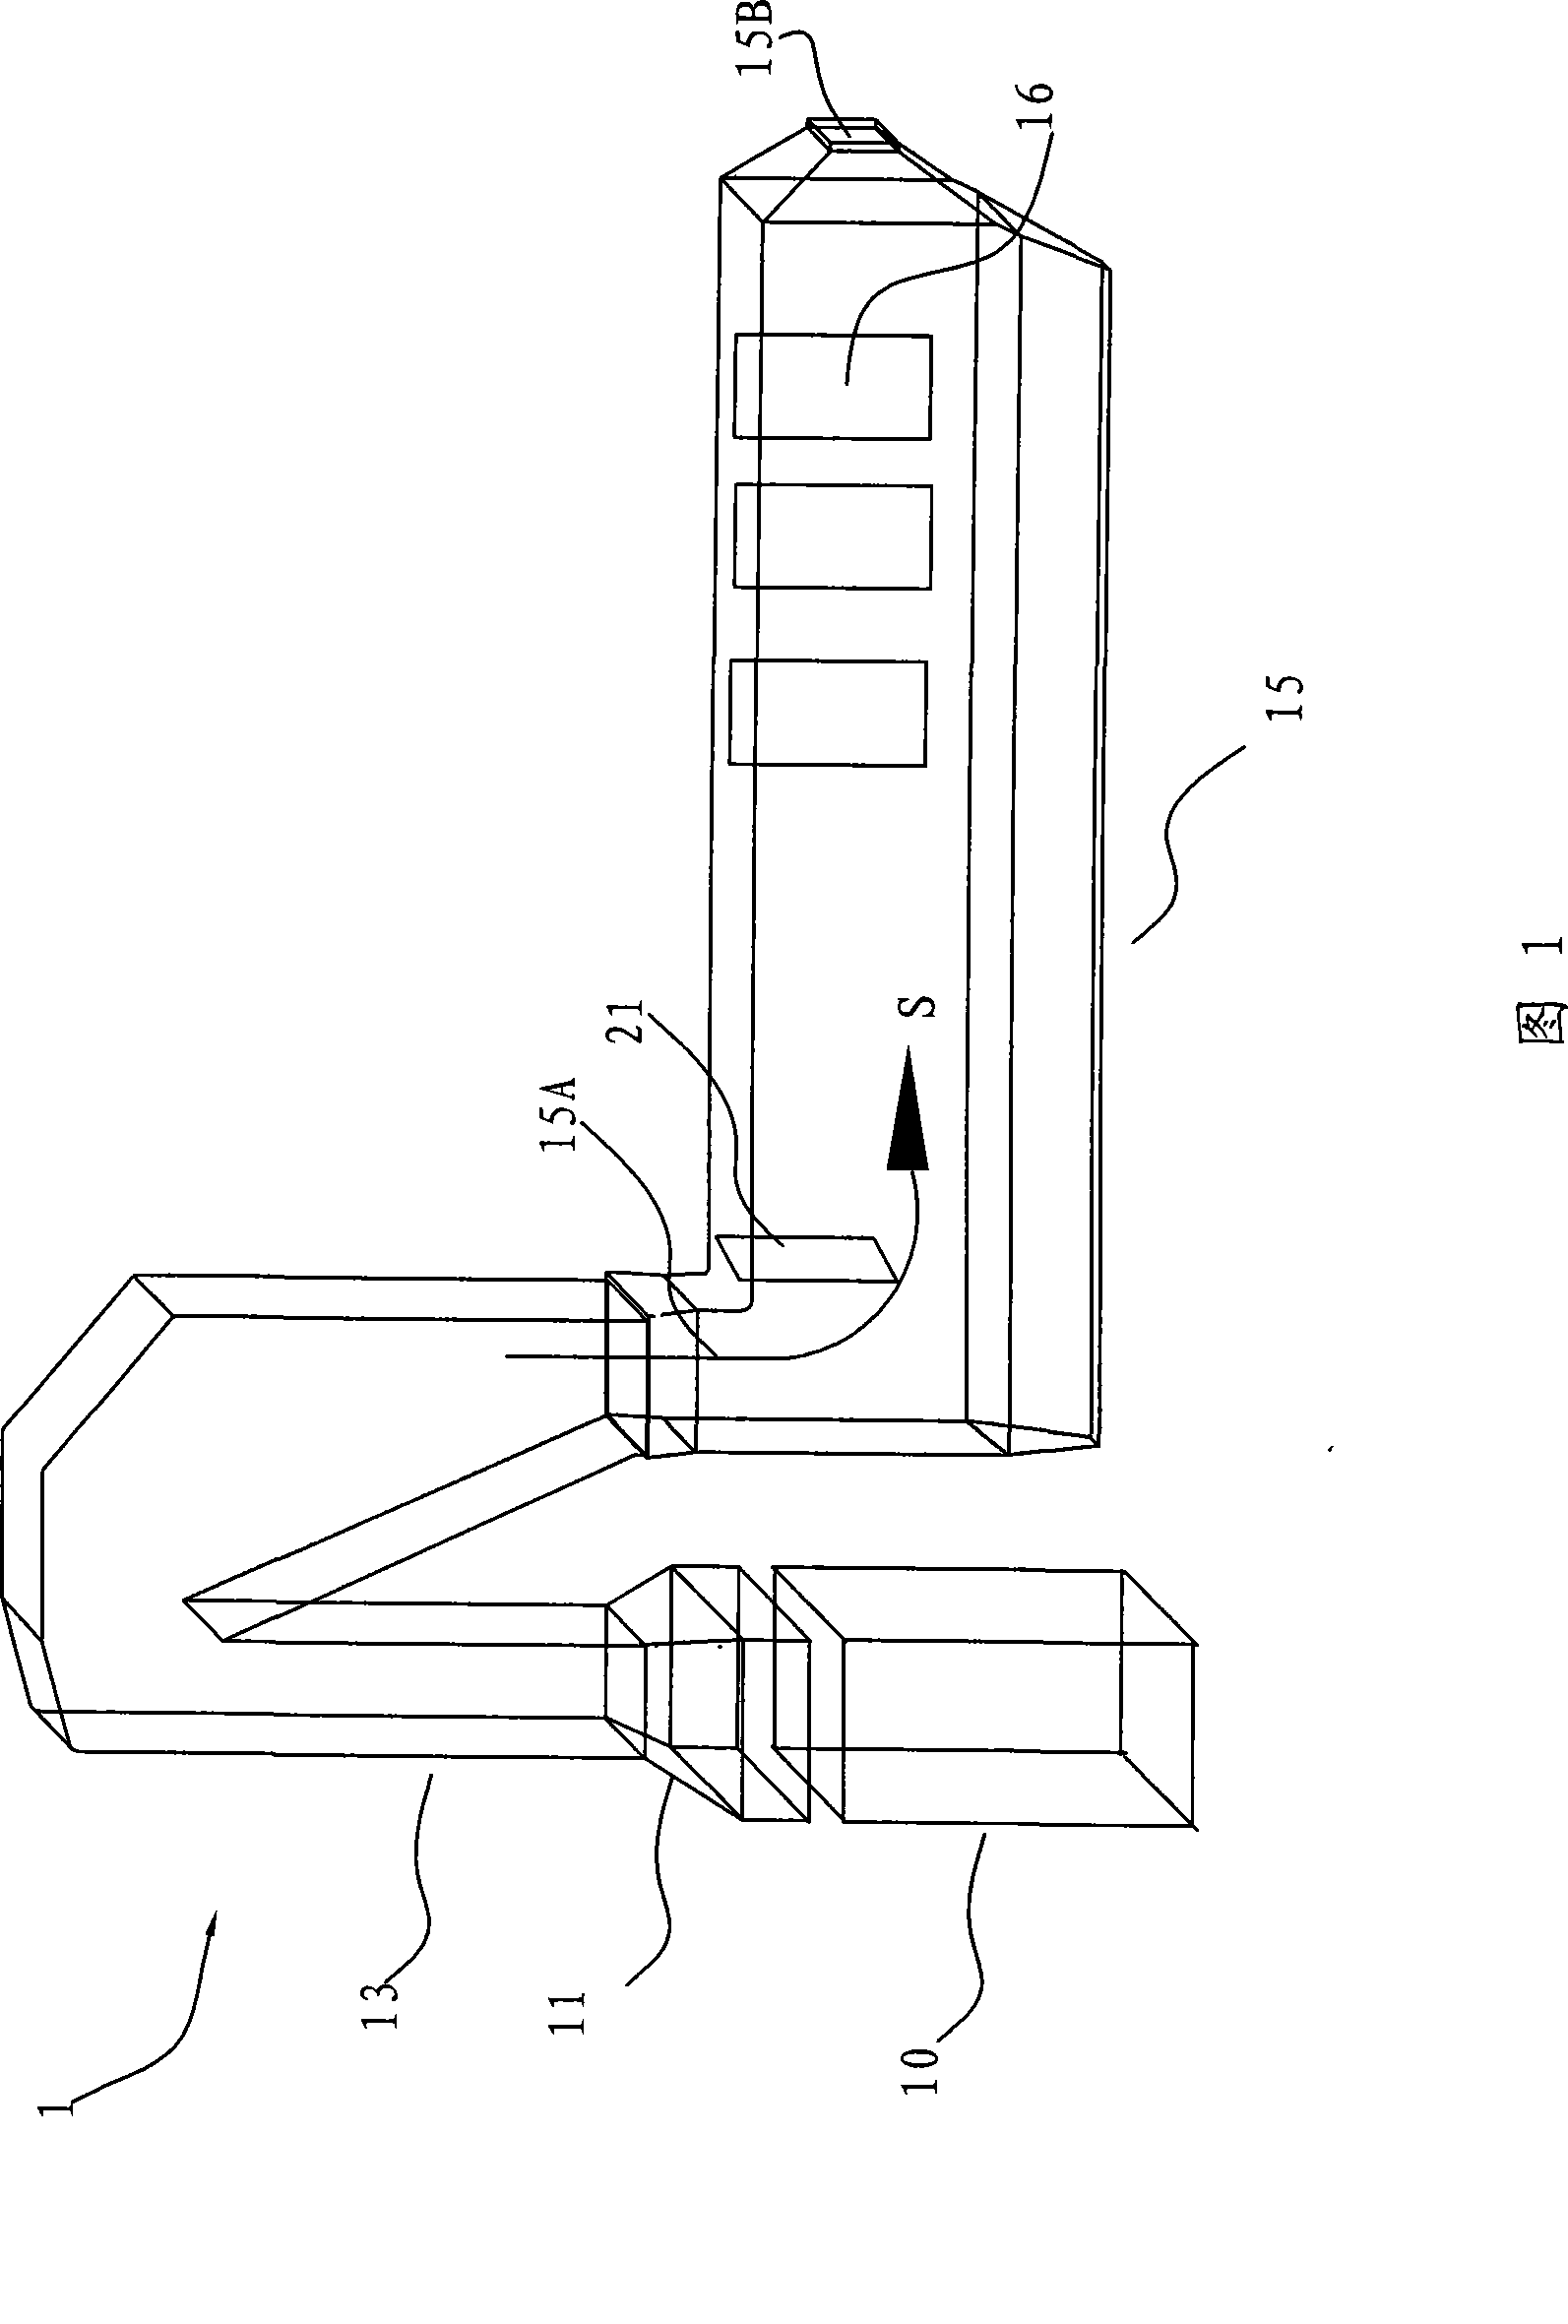 Exhaust-heating boiler and furnace body thereof